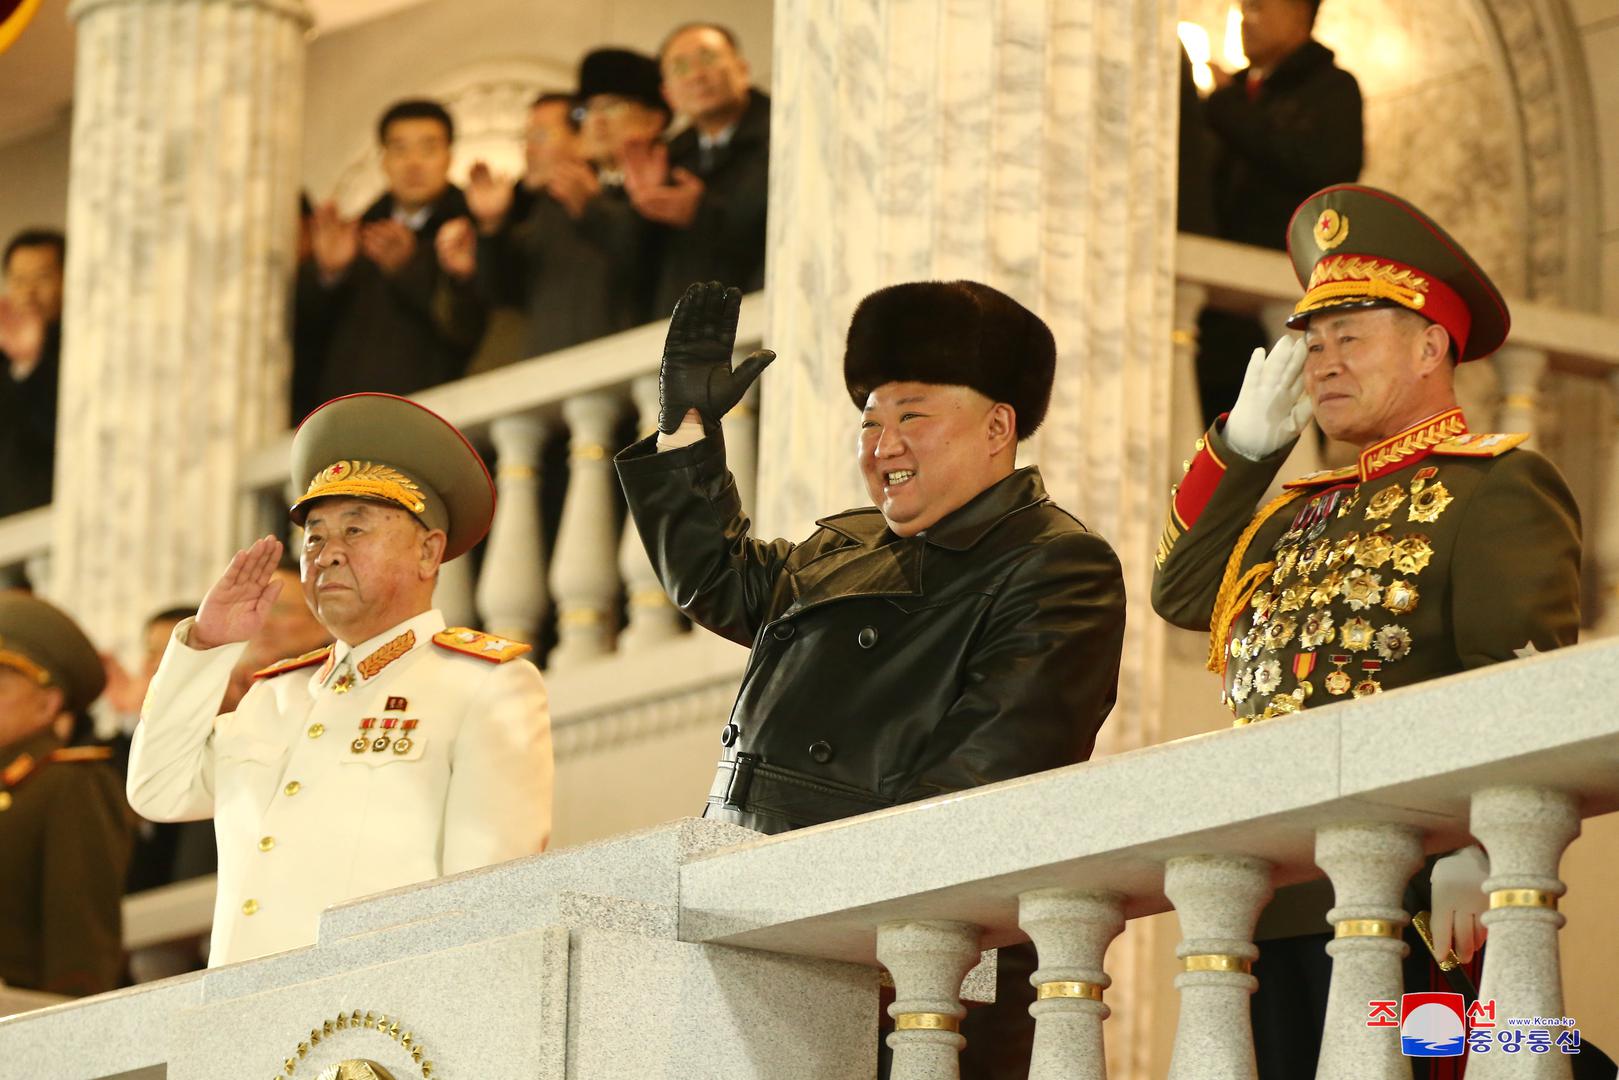 8th Congress of the Workers' Party in Pyongyang North Korean leader Kim Jong Un waves during a ceremony for the 8th Congress of the Workers' Party in Pyongyang, North Korea January 14, 2021 in this photo supplied by North Korea's Central News Agency (KCNA).    KCNA via REUTERS    ATTENTION EDITORS - THIS IMAGE WAS PROVIDED BY A THIRD PARTY. REUTERS IS UNABLE TO INDEPENDENTLY VERIFY THIS IMAGE. NO THIRD PARTY SALES. SOUTH KOREA OUT. NO COMMERCIAL OR EDITORIAL SALES IN SOUTH KOREA. KCNA